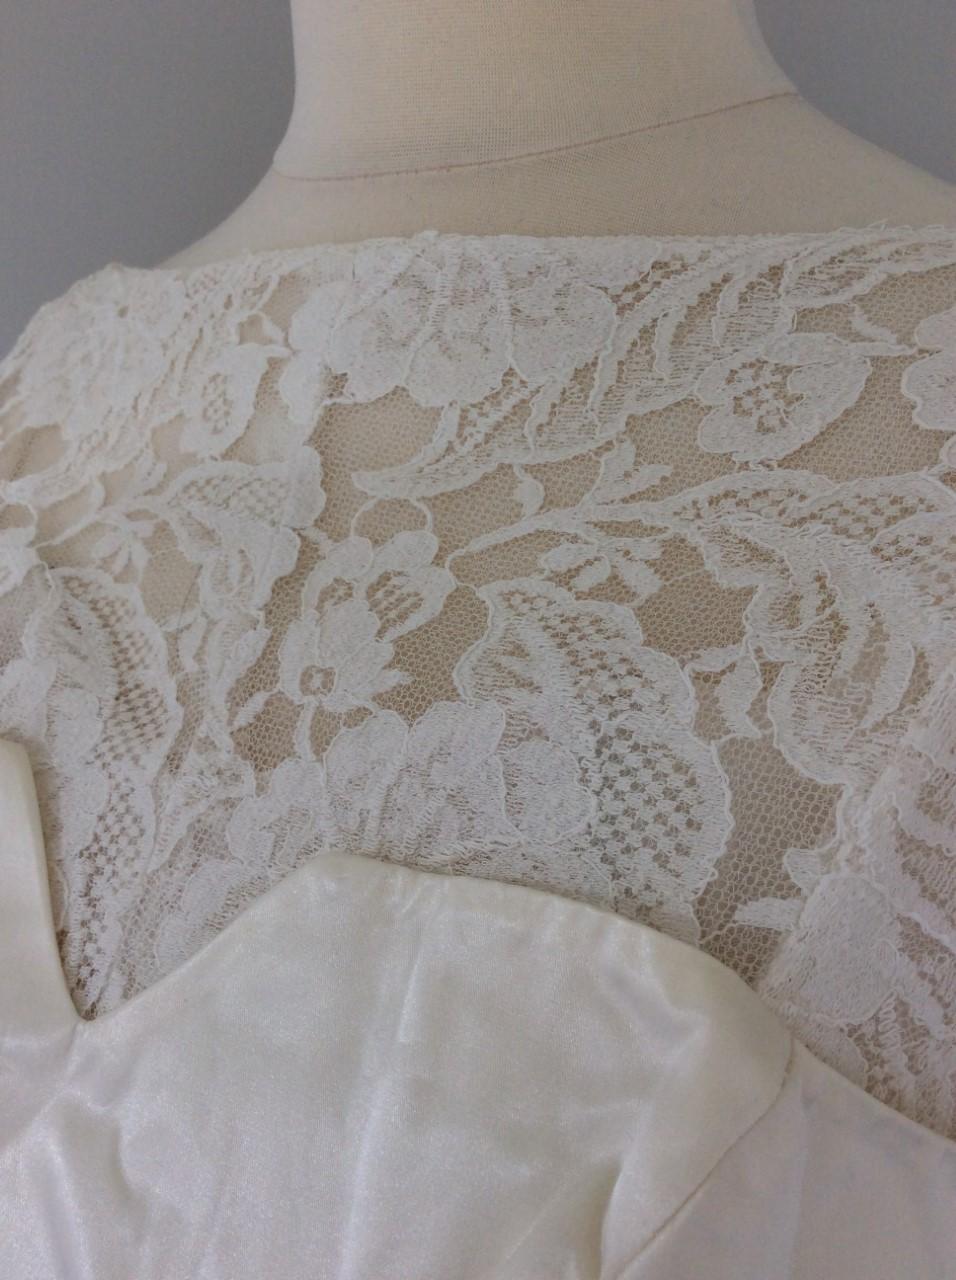 Vintage 1970's custom made cream wedding gown / occasion dress Cream floral lace fabric over cream polyester lining which is boned at the bust and has shoulder straps.  Shaped, ‘satin’ fabric overlay to bustline - lace above is unlined.  Boat